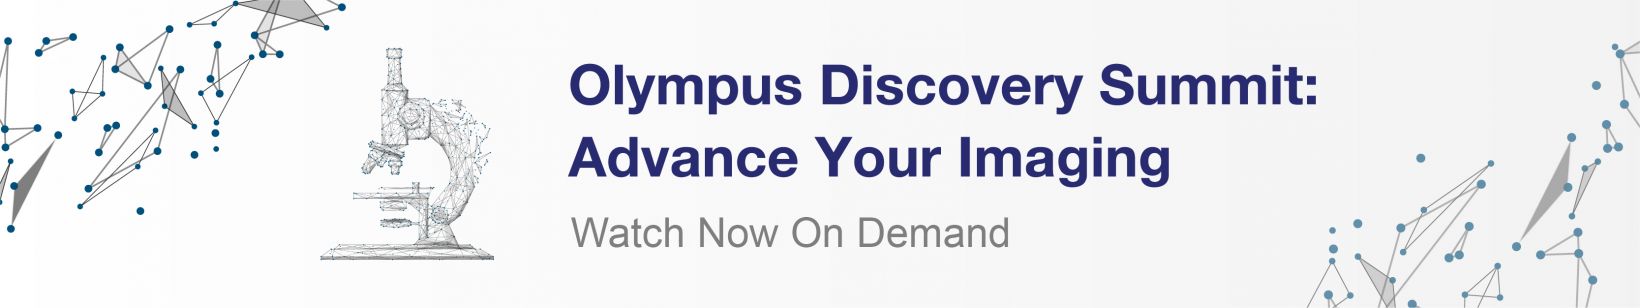 Olympus Discovery Summit: Advance Your Imaging